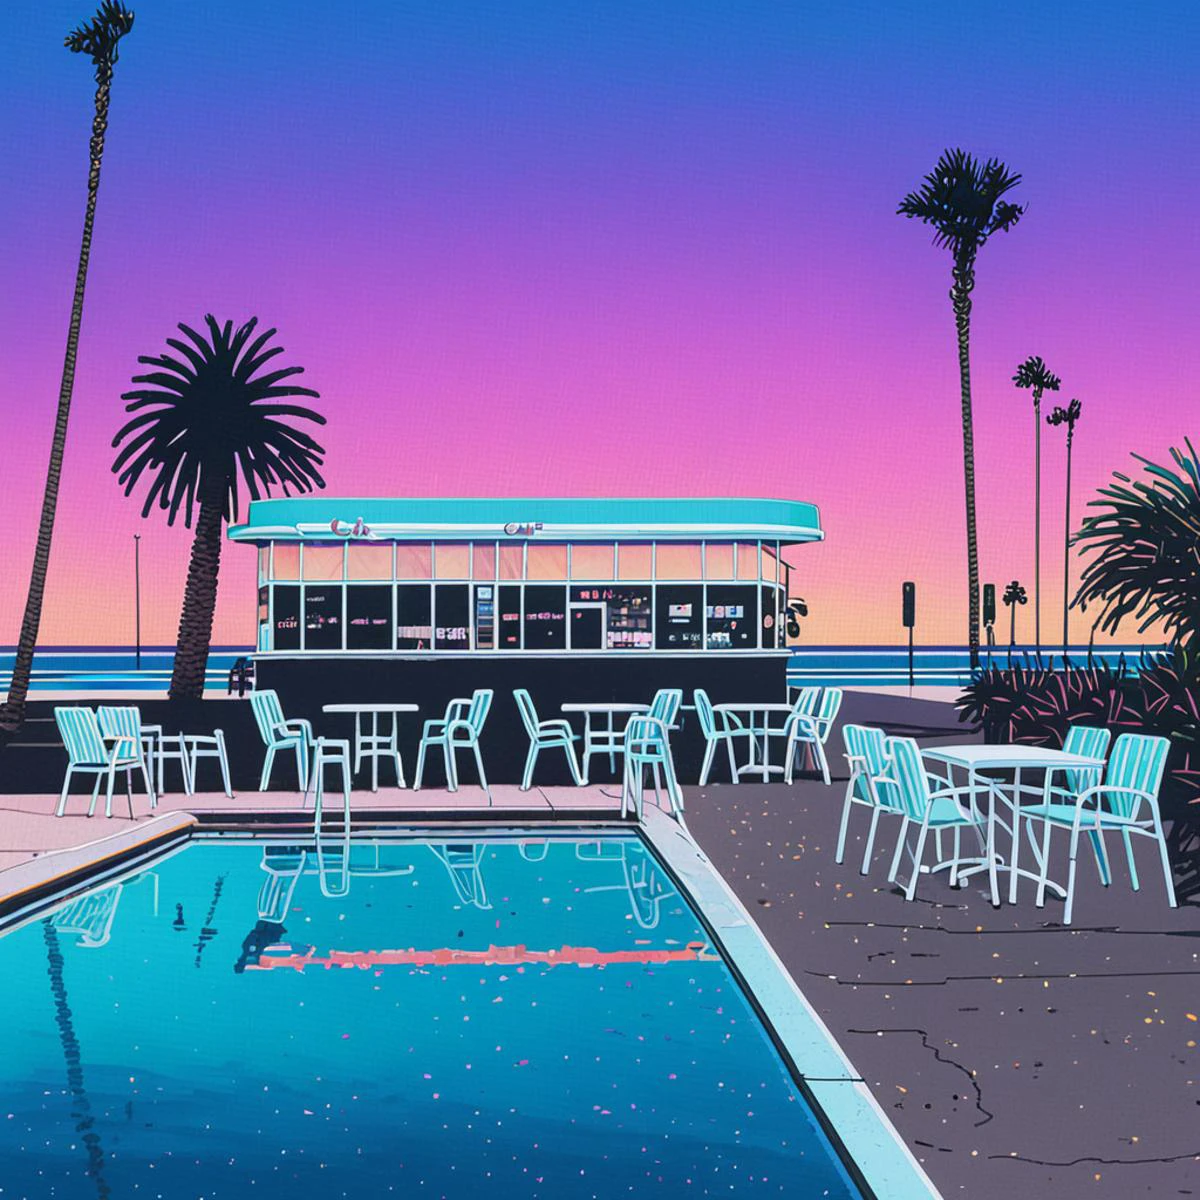 Lifted view of A Vintage 80's Cafe with pool surrounded by beach and Palm Trees at sunset, gradient sky, Reflexión del agua, camino, Sillas, edificio, 